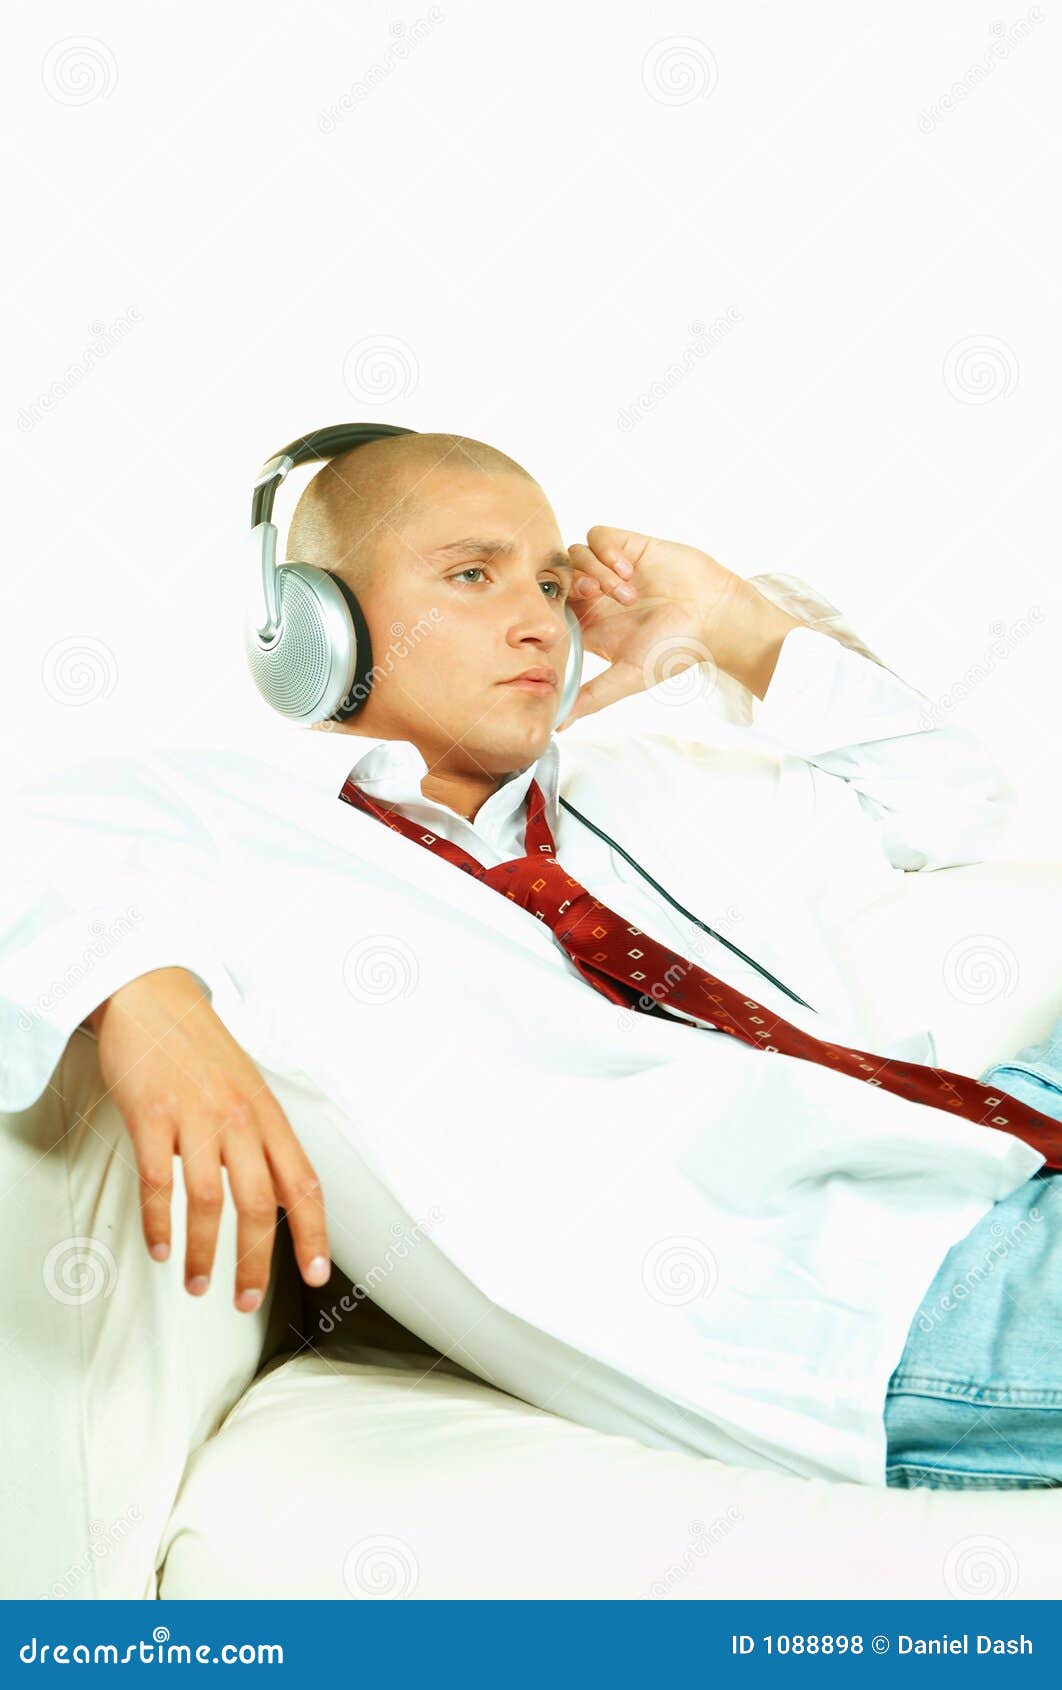 Download this Businessman Relaxing... picture